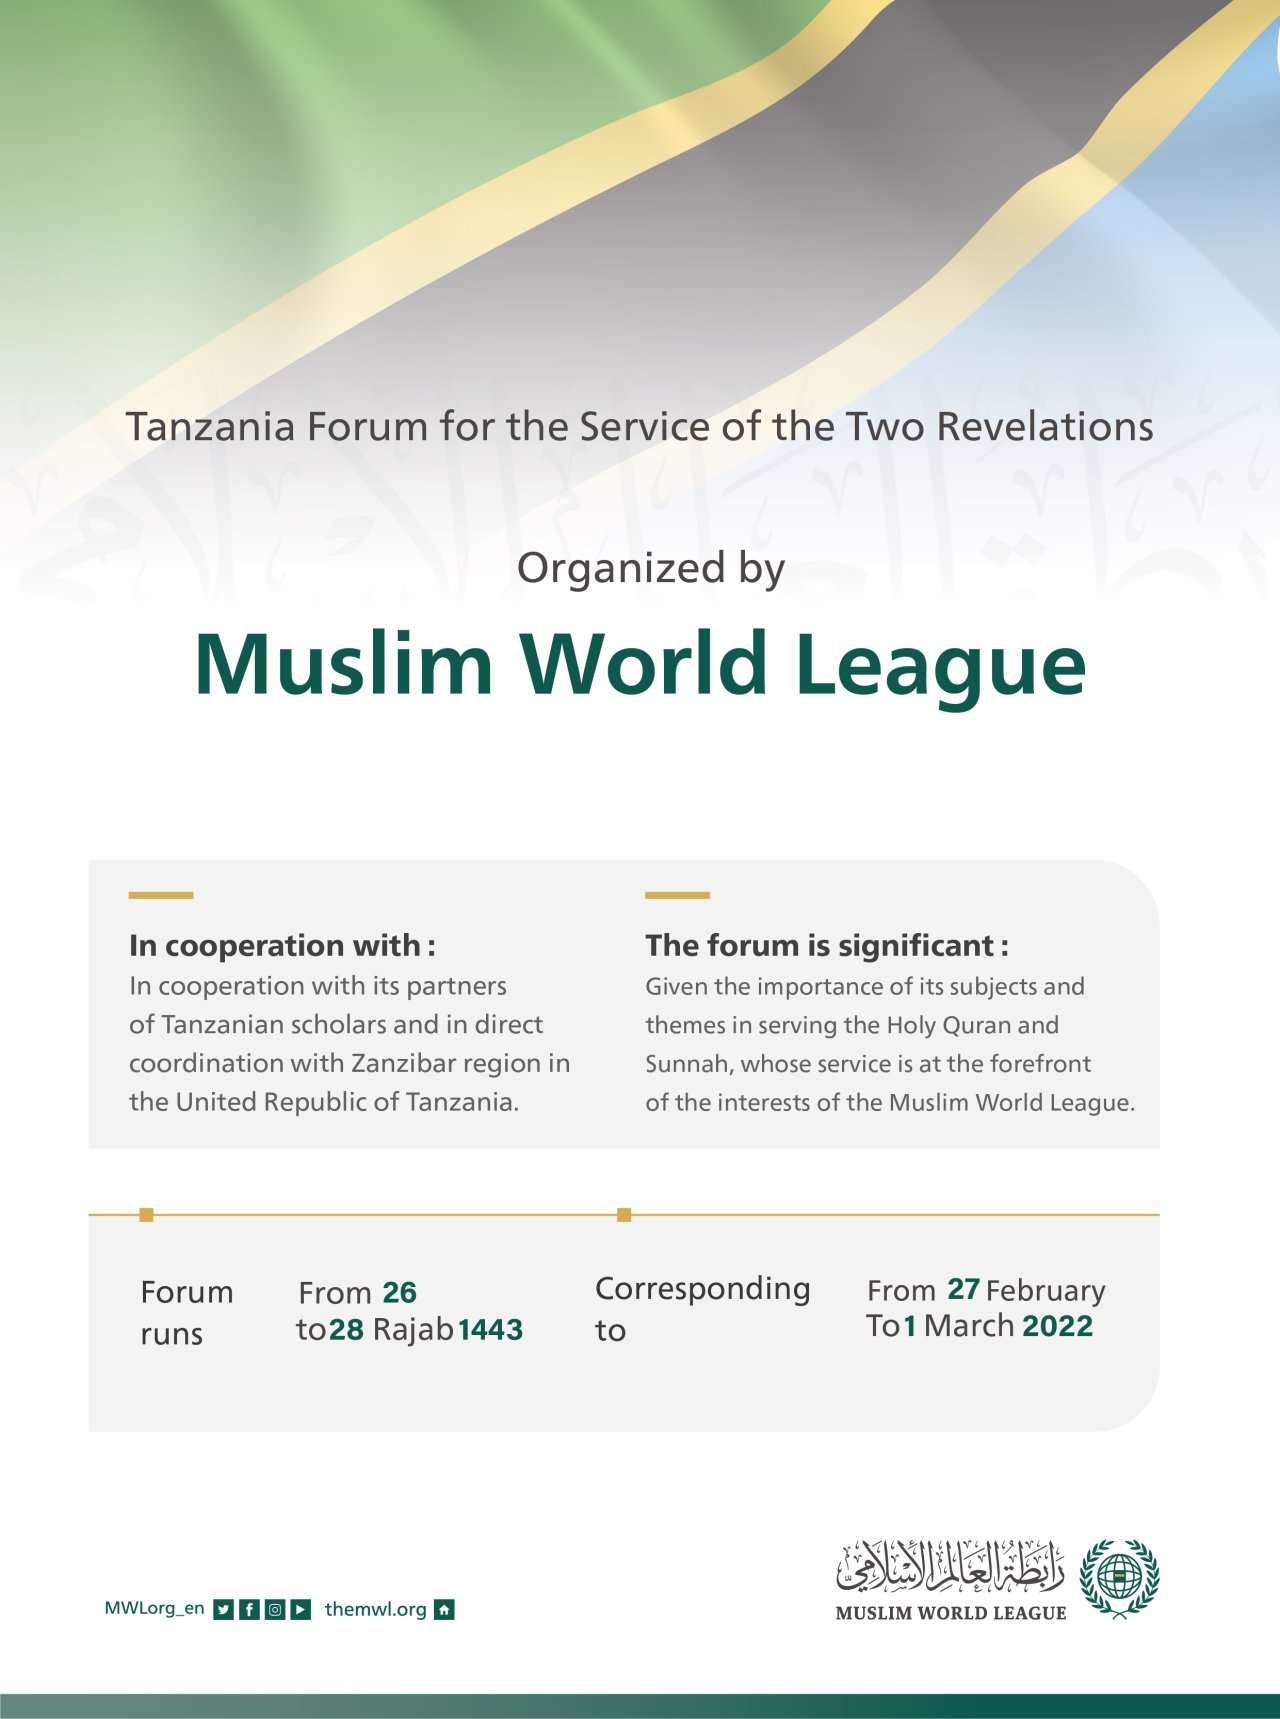 the MWL is hosting the Tanzania Forum for the Service of Revelations in cooperation with prominent African scholars and in coordination with the Zanzibar Regional Government.